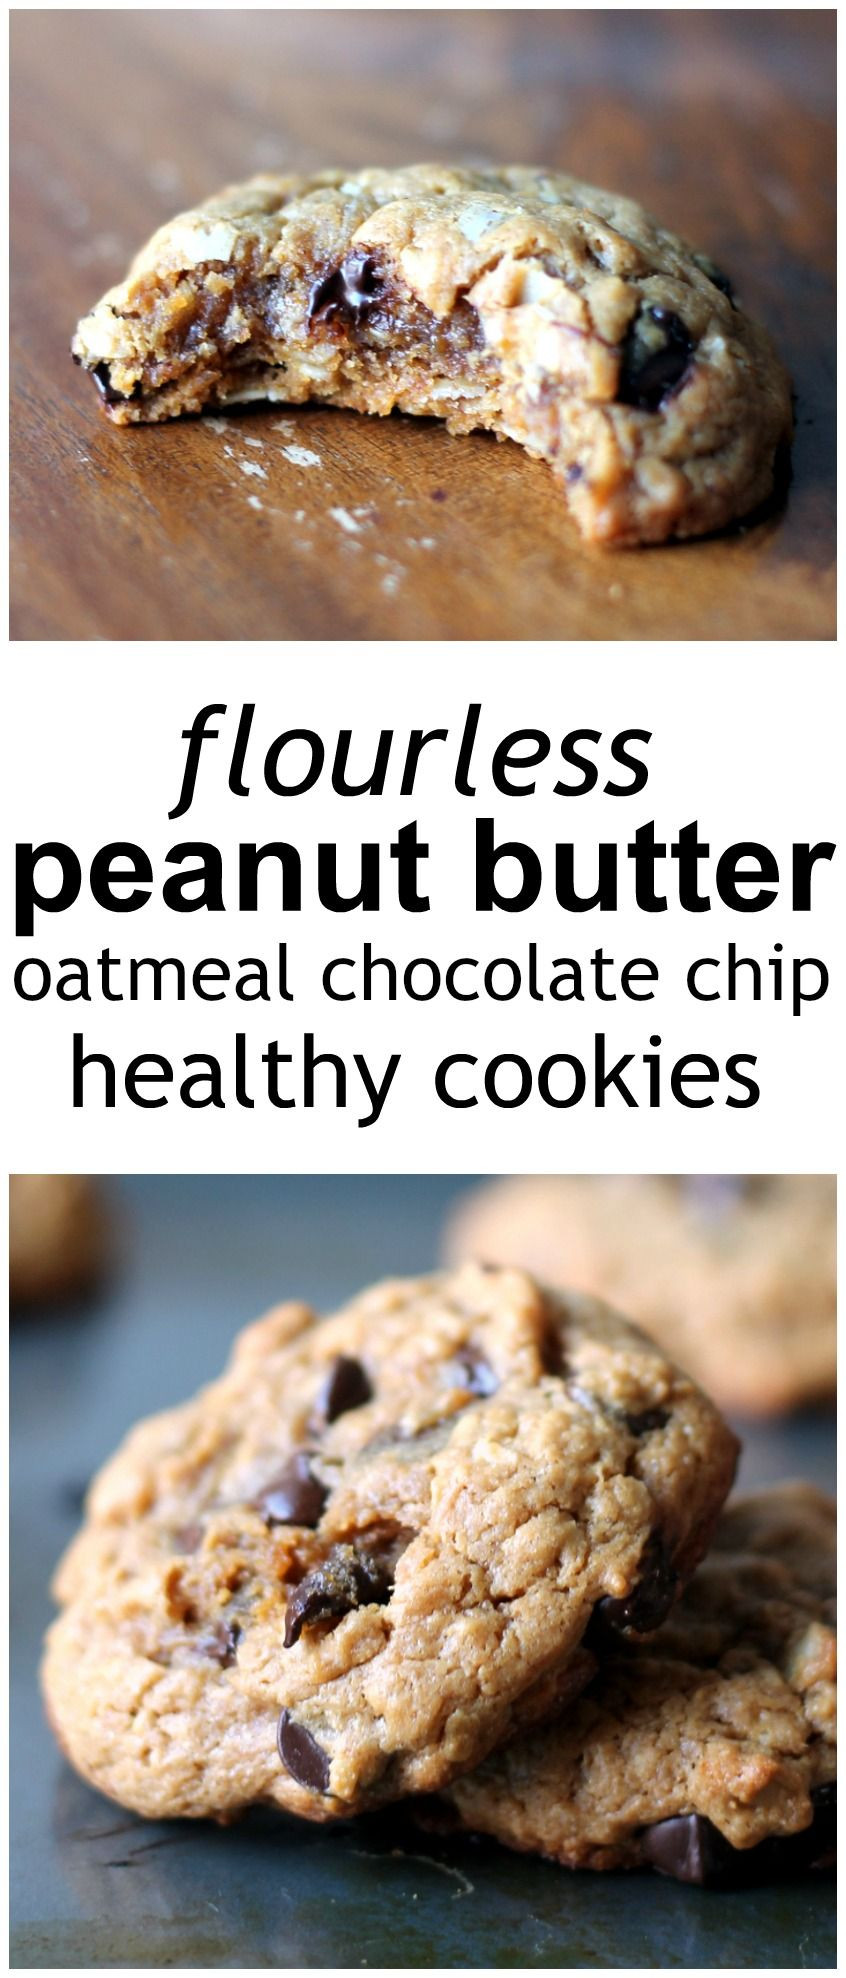 Choc Chip Oatmeal Cookies Healthy
 Peanut Butter Oatmeal Chocolate Chip Cookies flourless